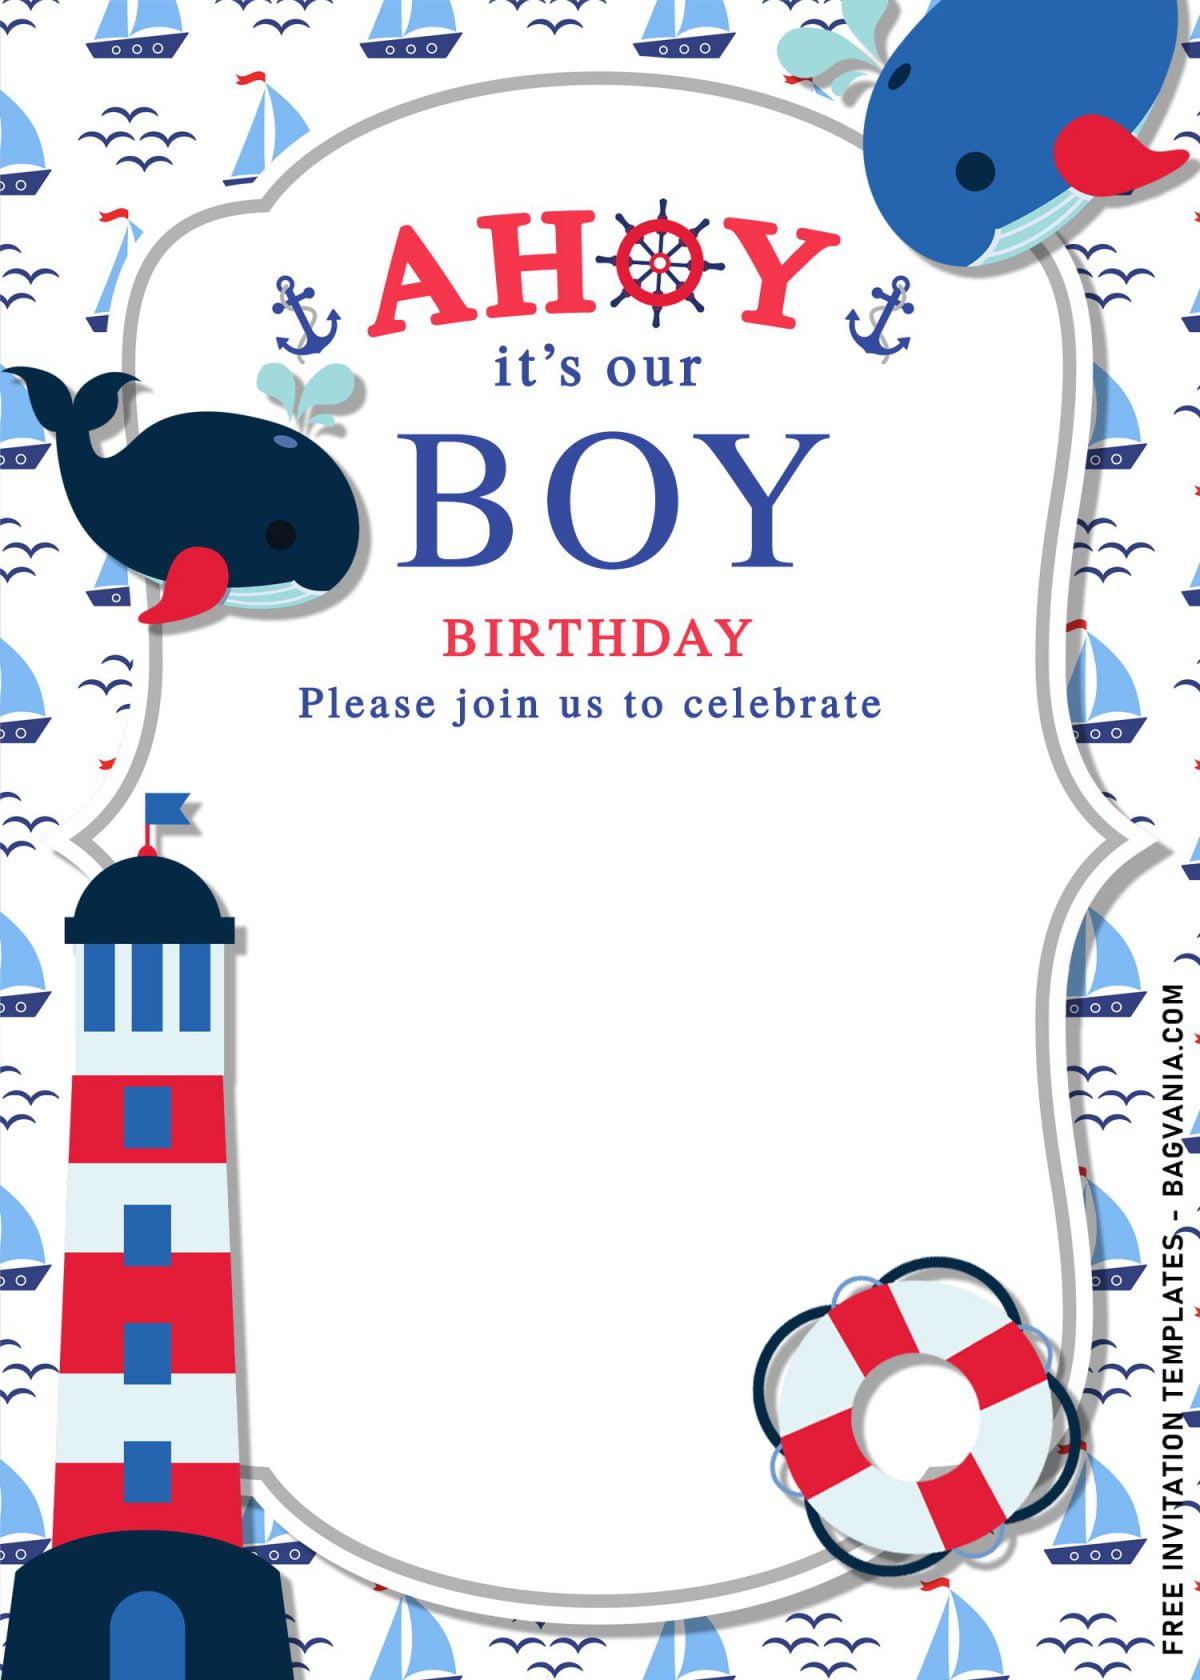 11+ Nautical Themed Birthday Invitation Templates For Your Kid’s Birthday Bash and has Navy blue whale